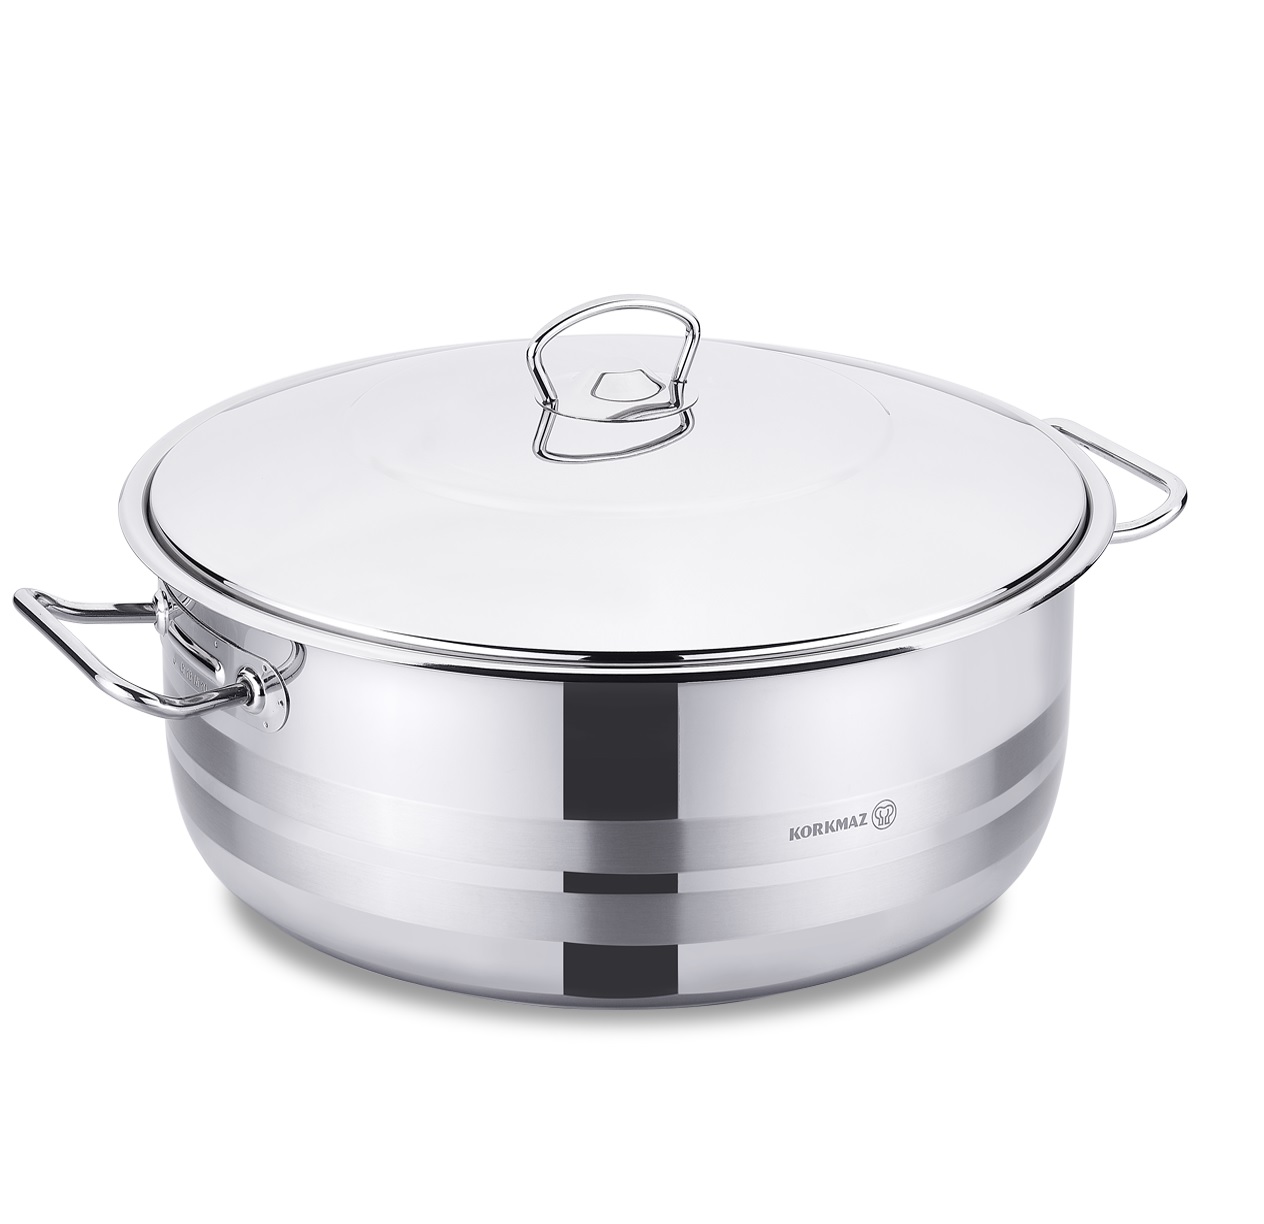 Korkmaz Mega Stainless Steel Capsulated Low Casserole With Stainless Steel Lids - 30 Quart